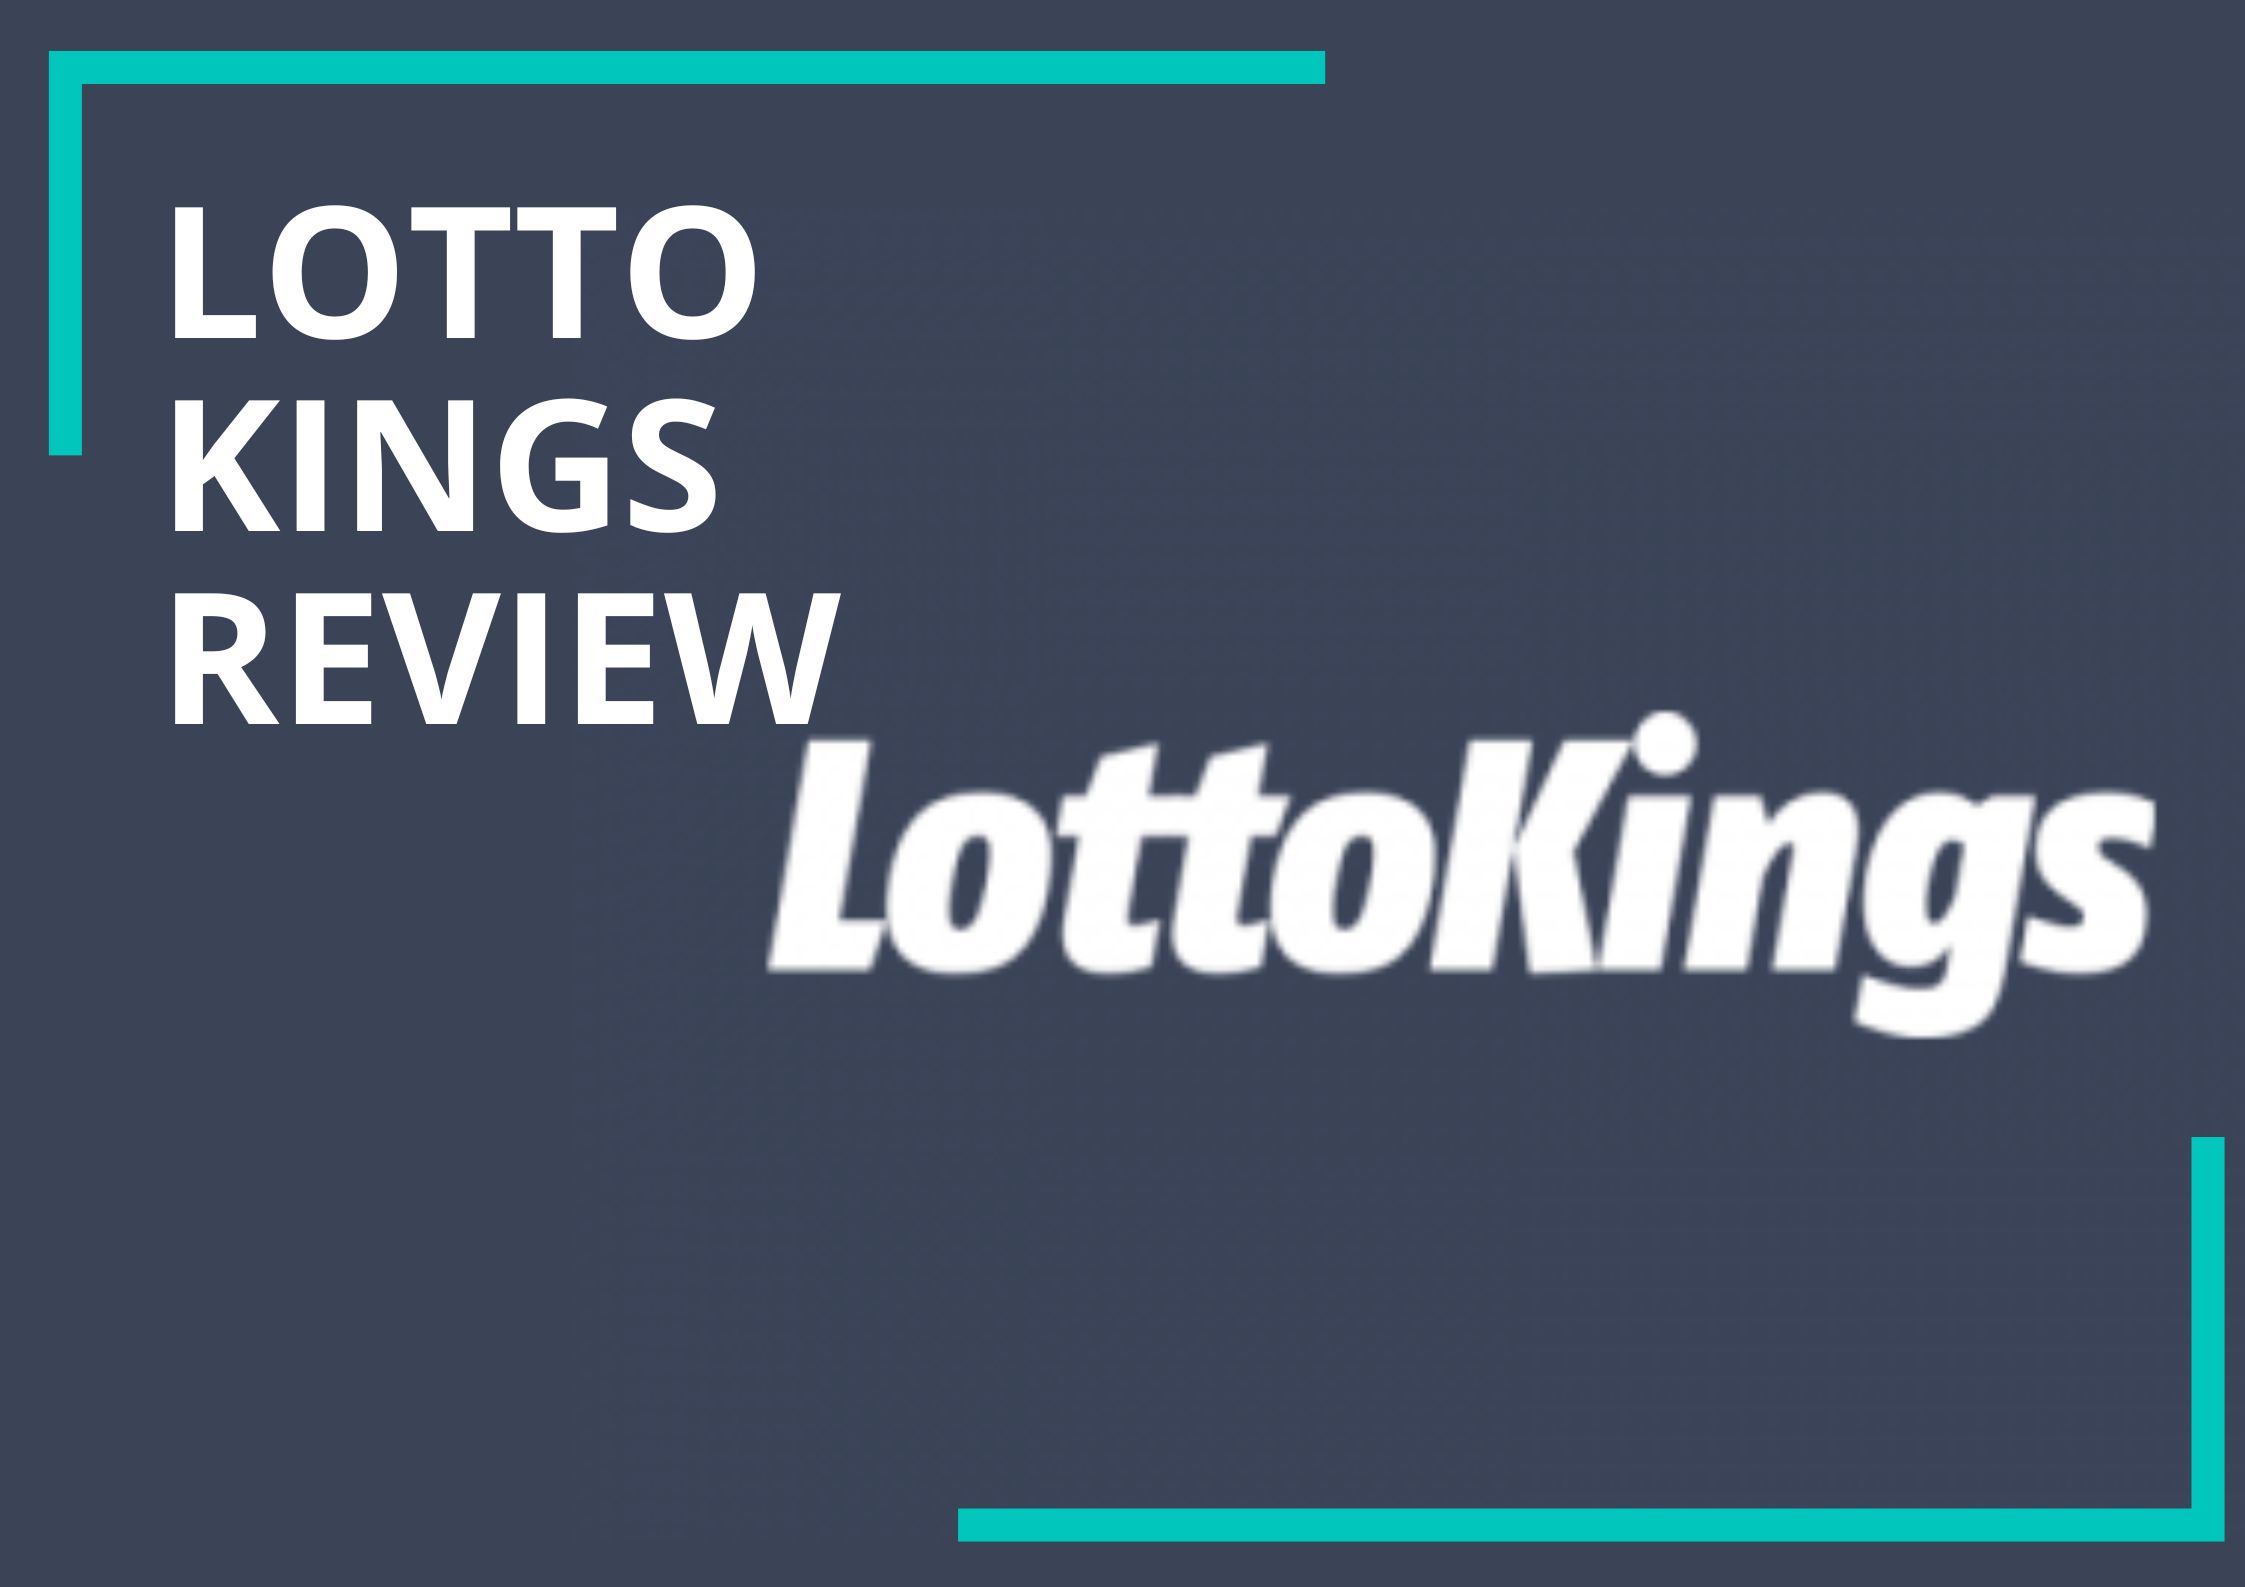 LottoKings Review